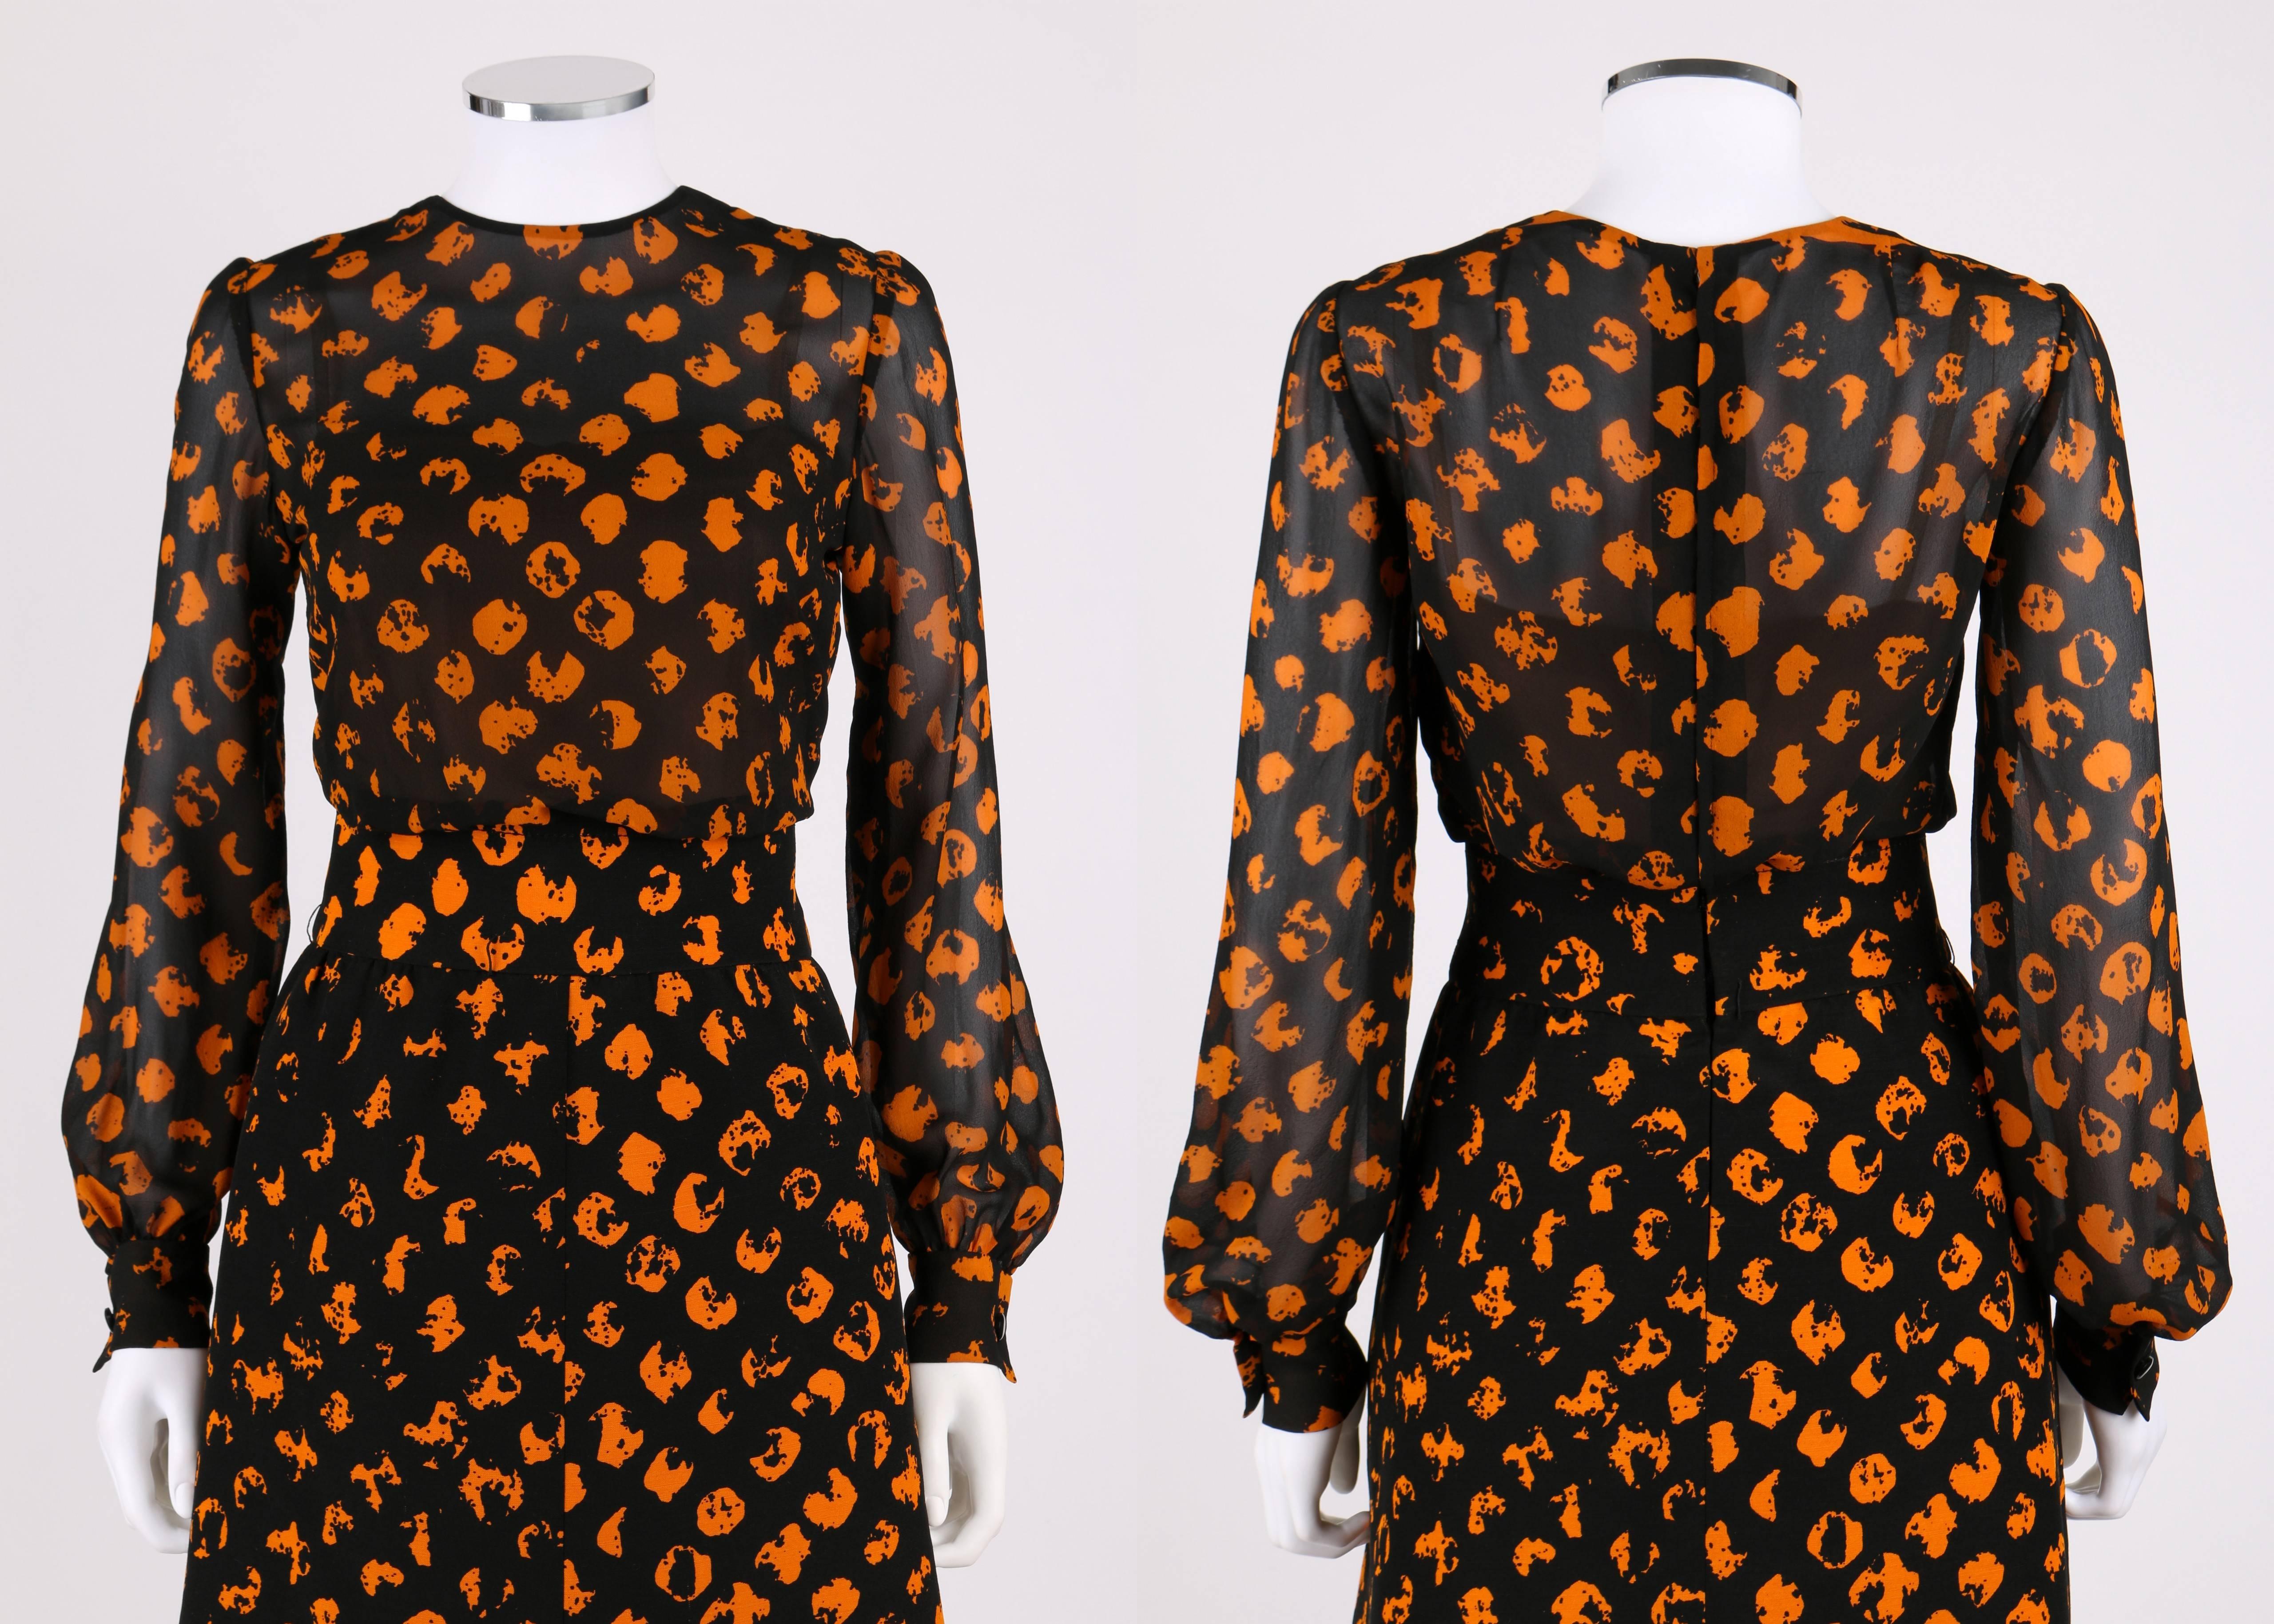 Vintage Christian Dior Haute Couture designed by Marc Bohn Autumn/Winter 1972 black and orange stylized polka dot print blouse and skirt set. Round neckline blouse with nude attached camisole underneath. Bishop sleeve with snap and button closure at